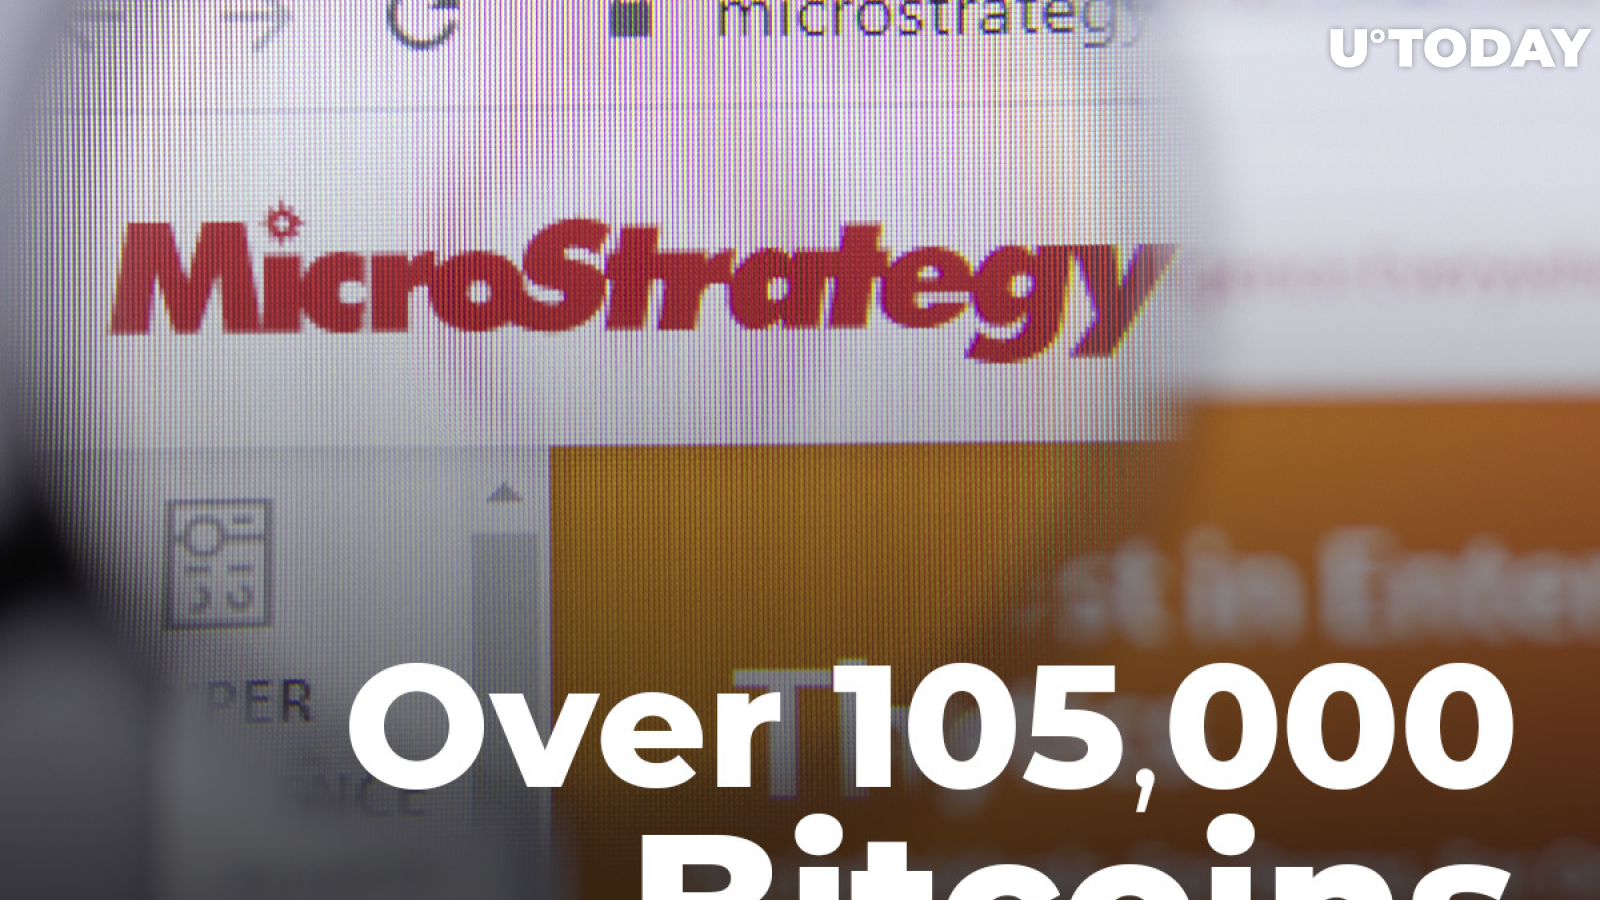 MicroStrategy Now Holds Over 105,000 Bitcoins After Buying Another 13,005 BTC